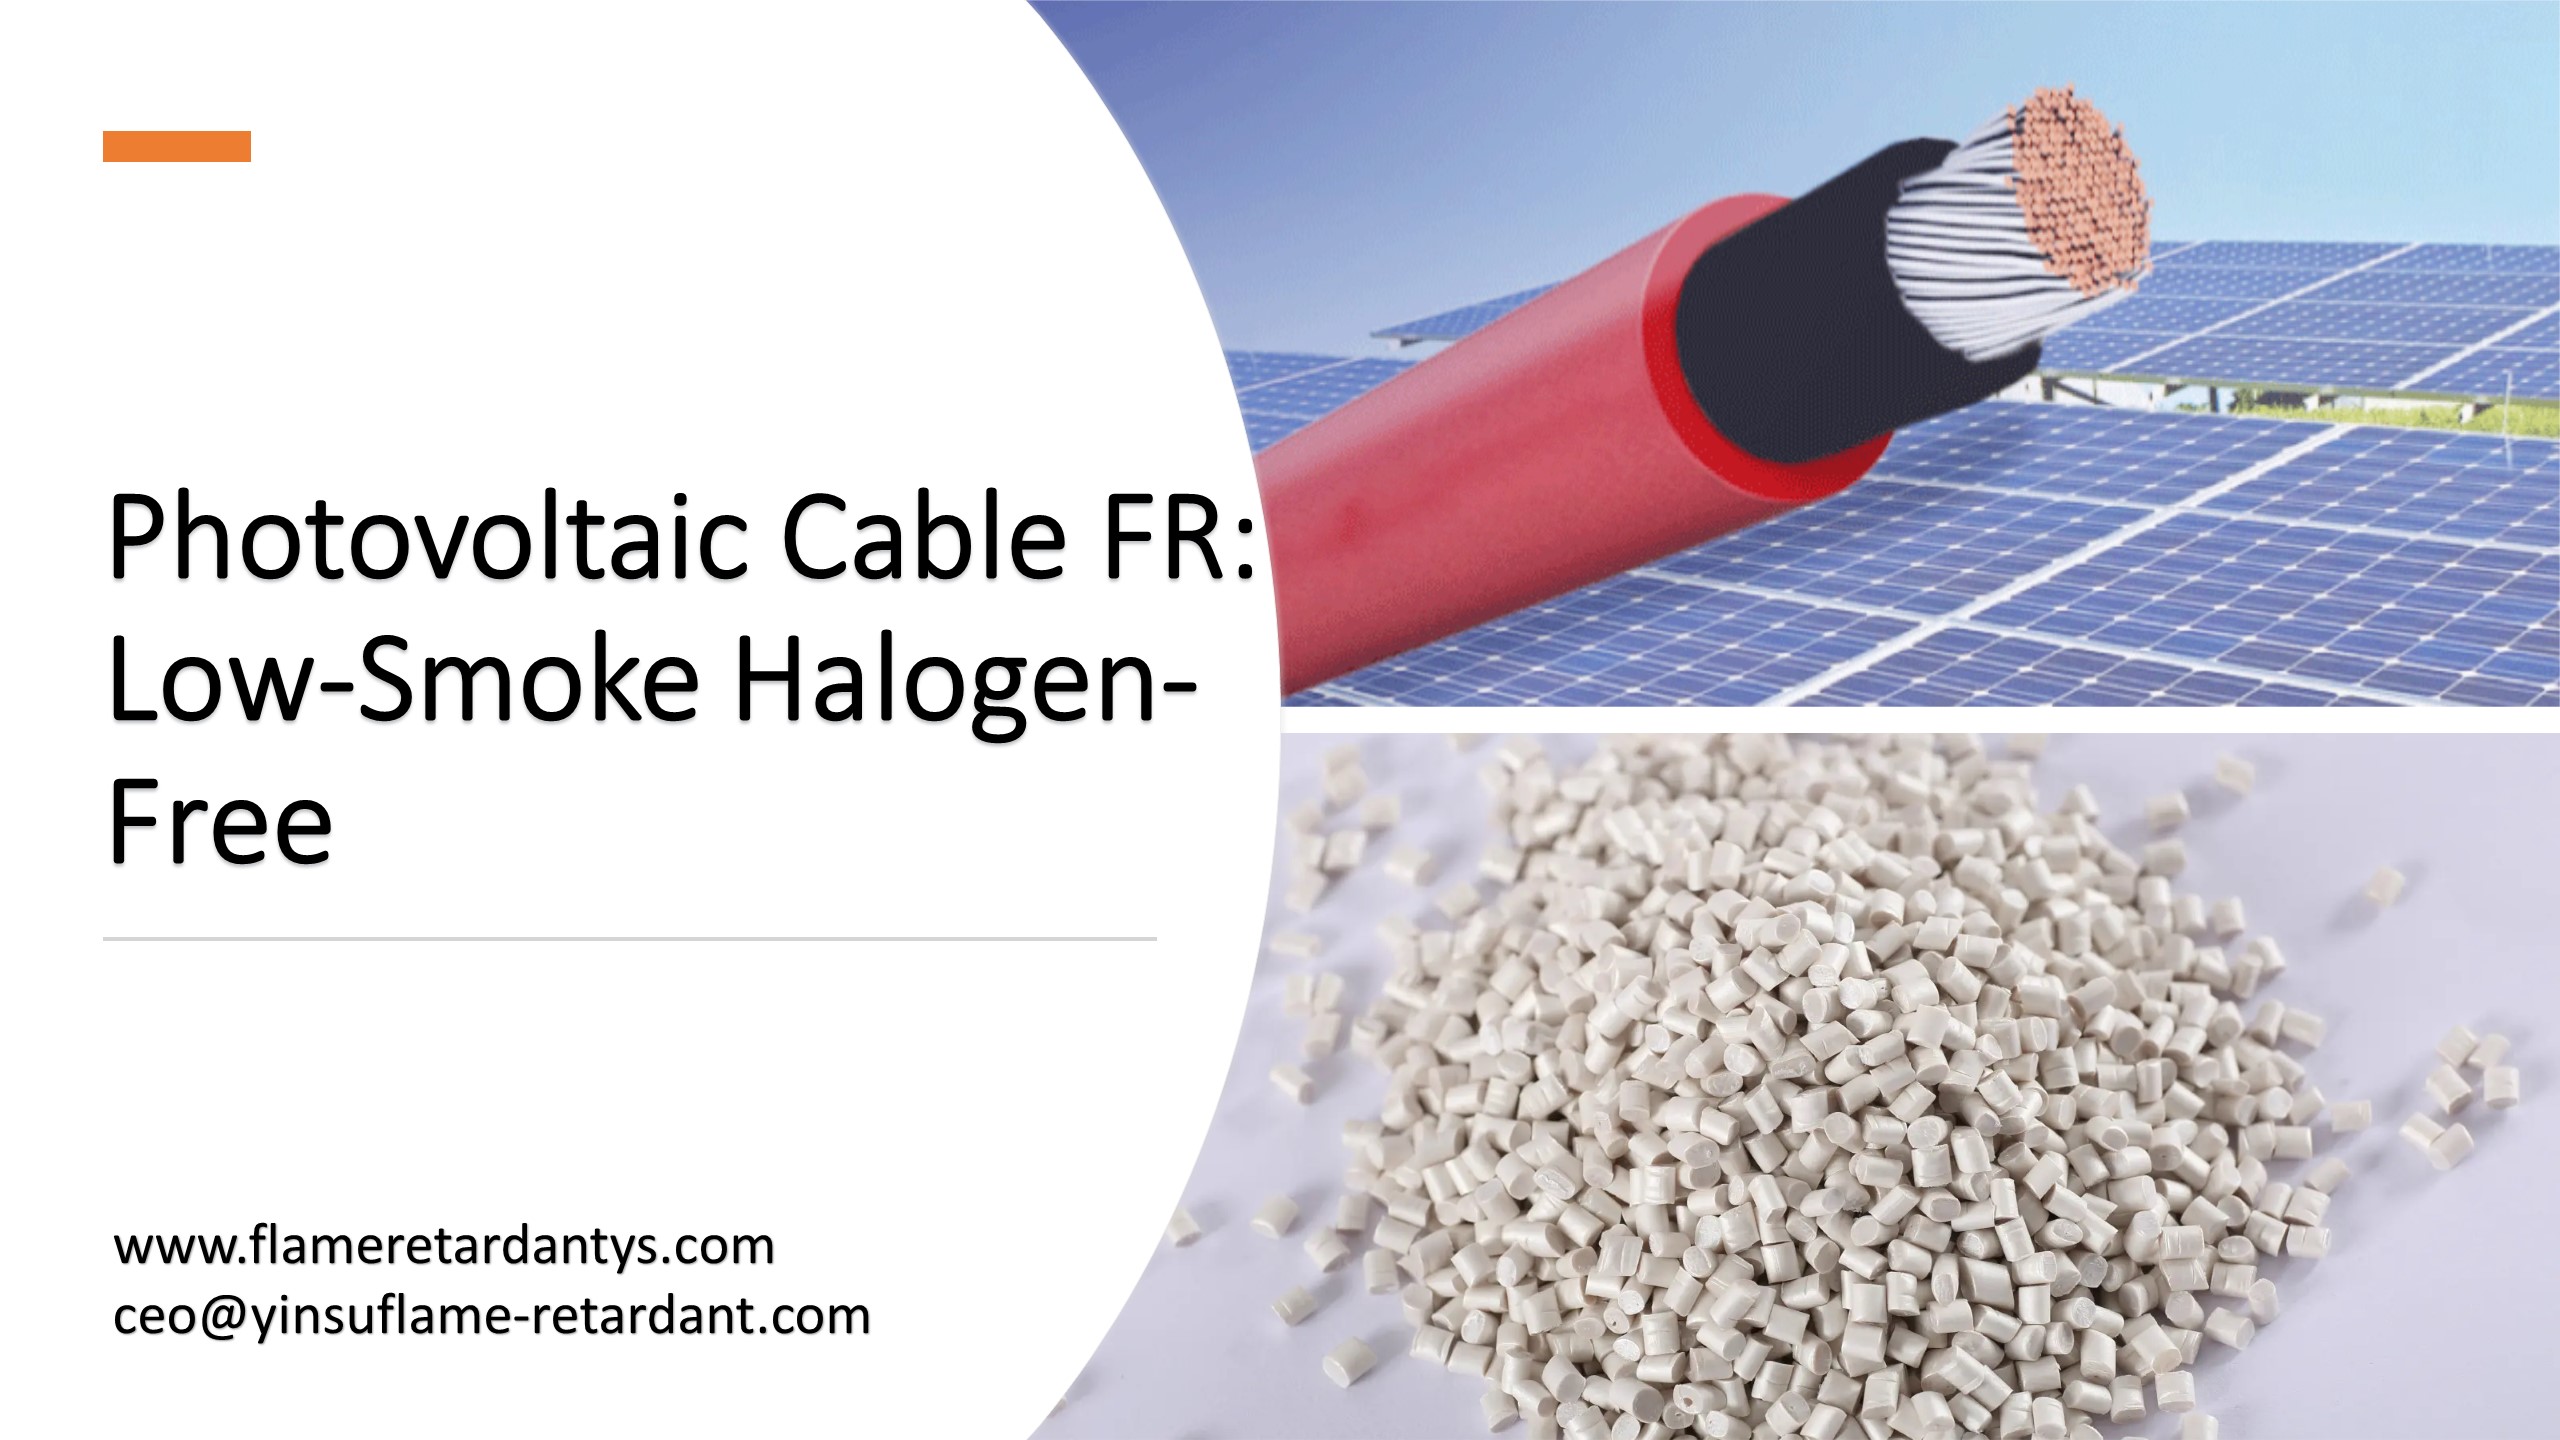 Photovoltaic Cable FR: Low-Smoke Halogen-Free